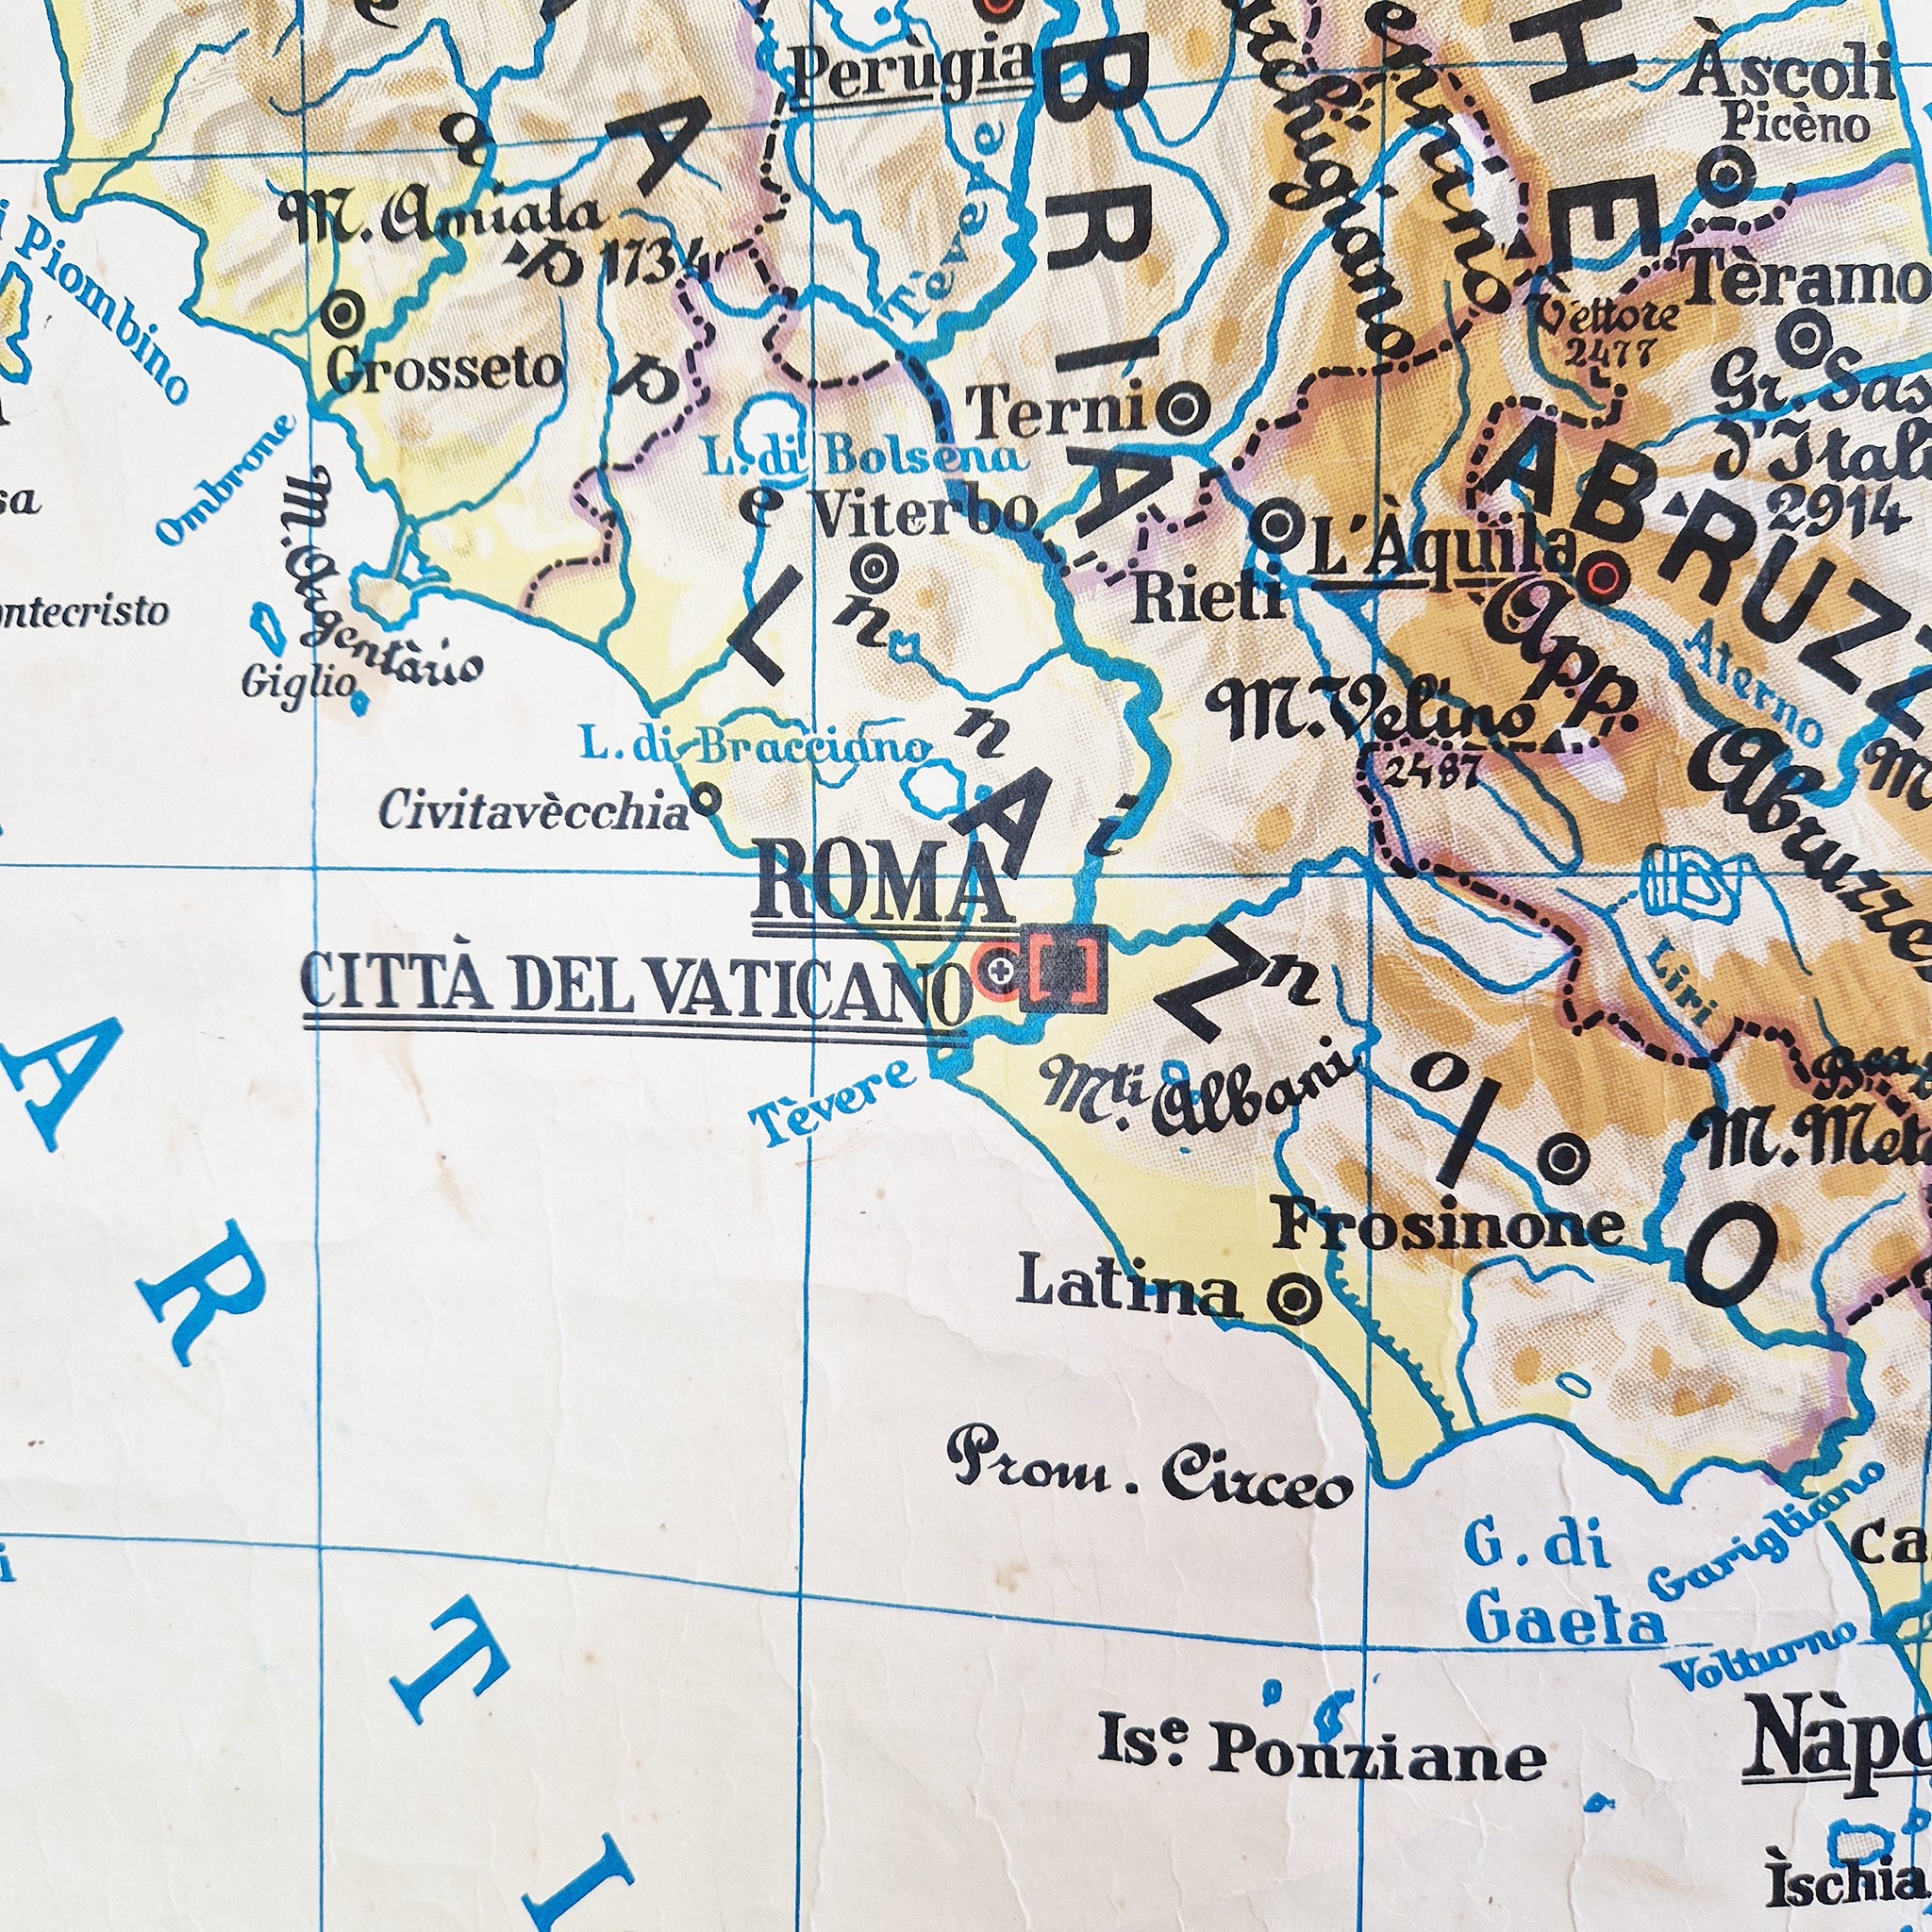 1950s wall map of Italy